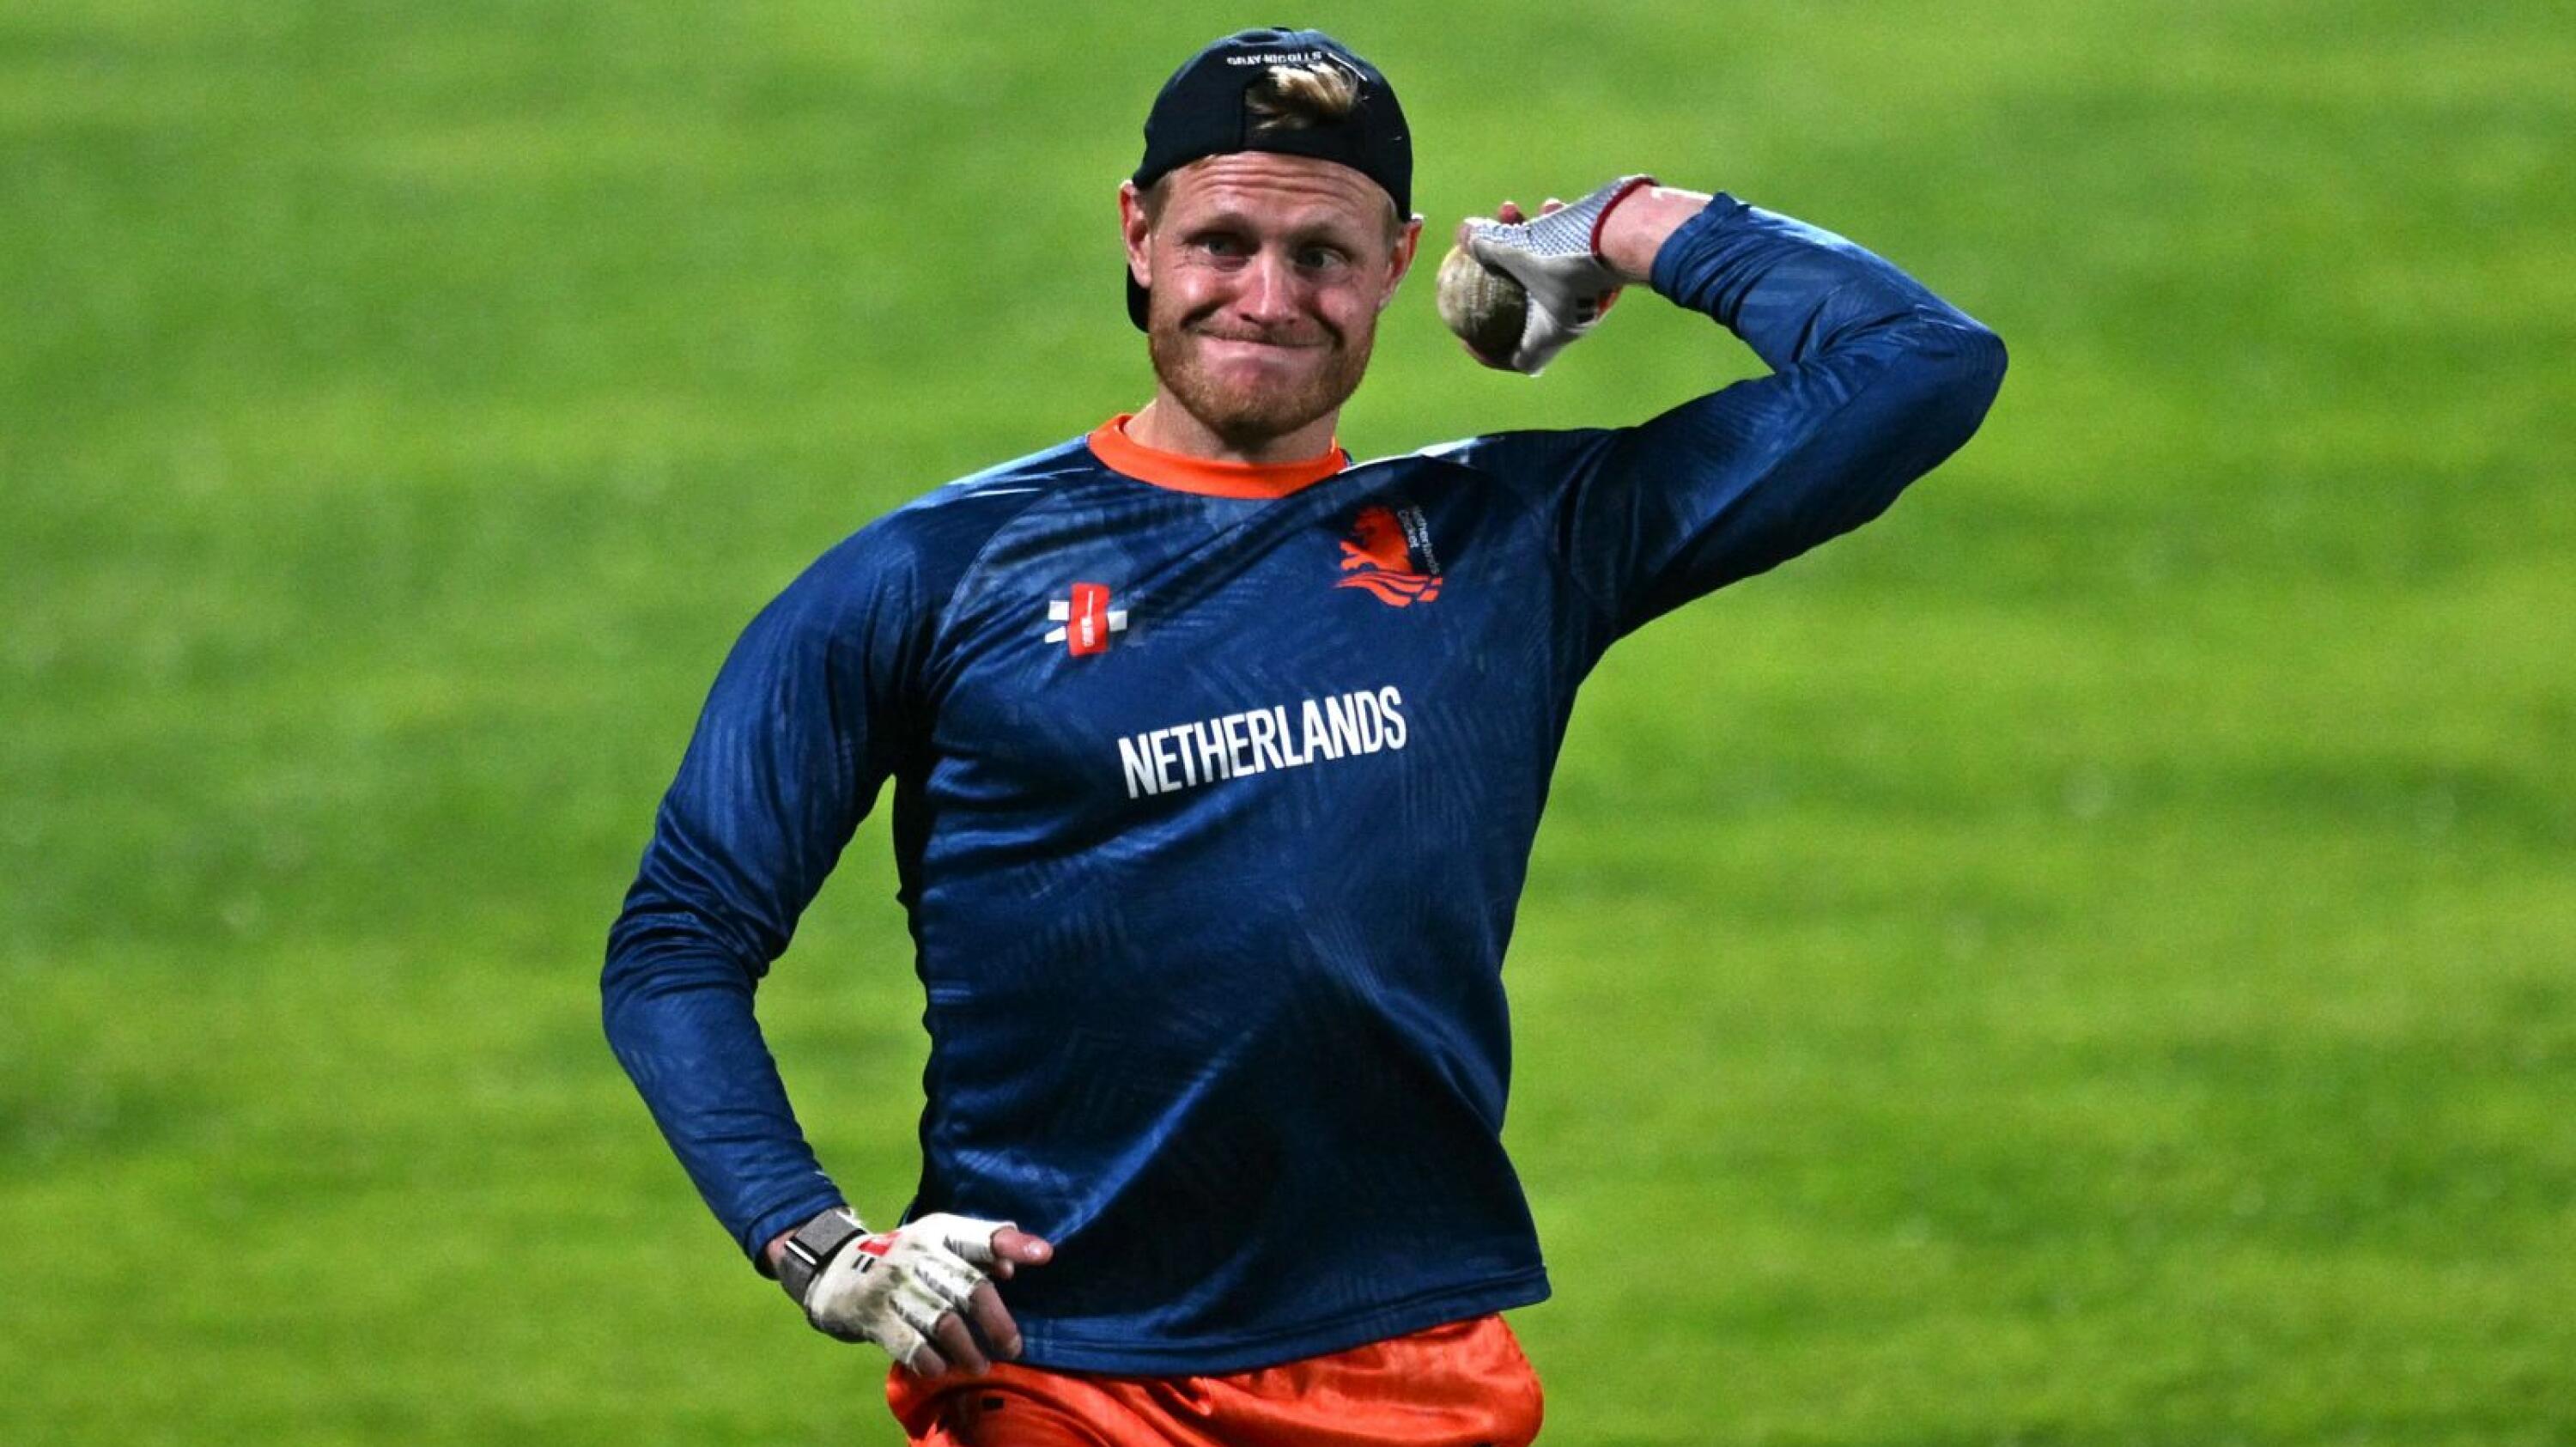 Netherlands' Sybrand Engelbrecht takes part in a practice session on the eve of their Cricket World Cup match against South Africa